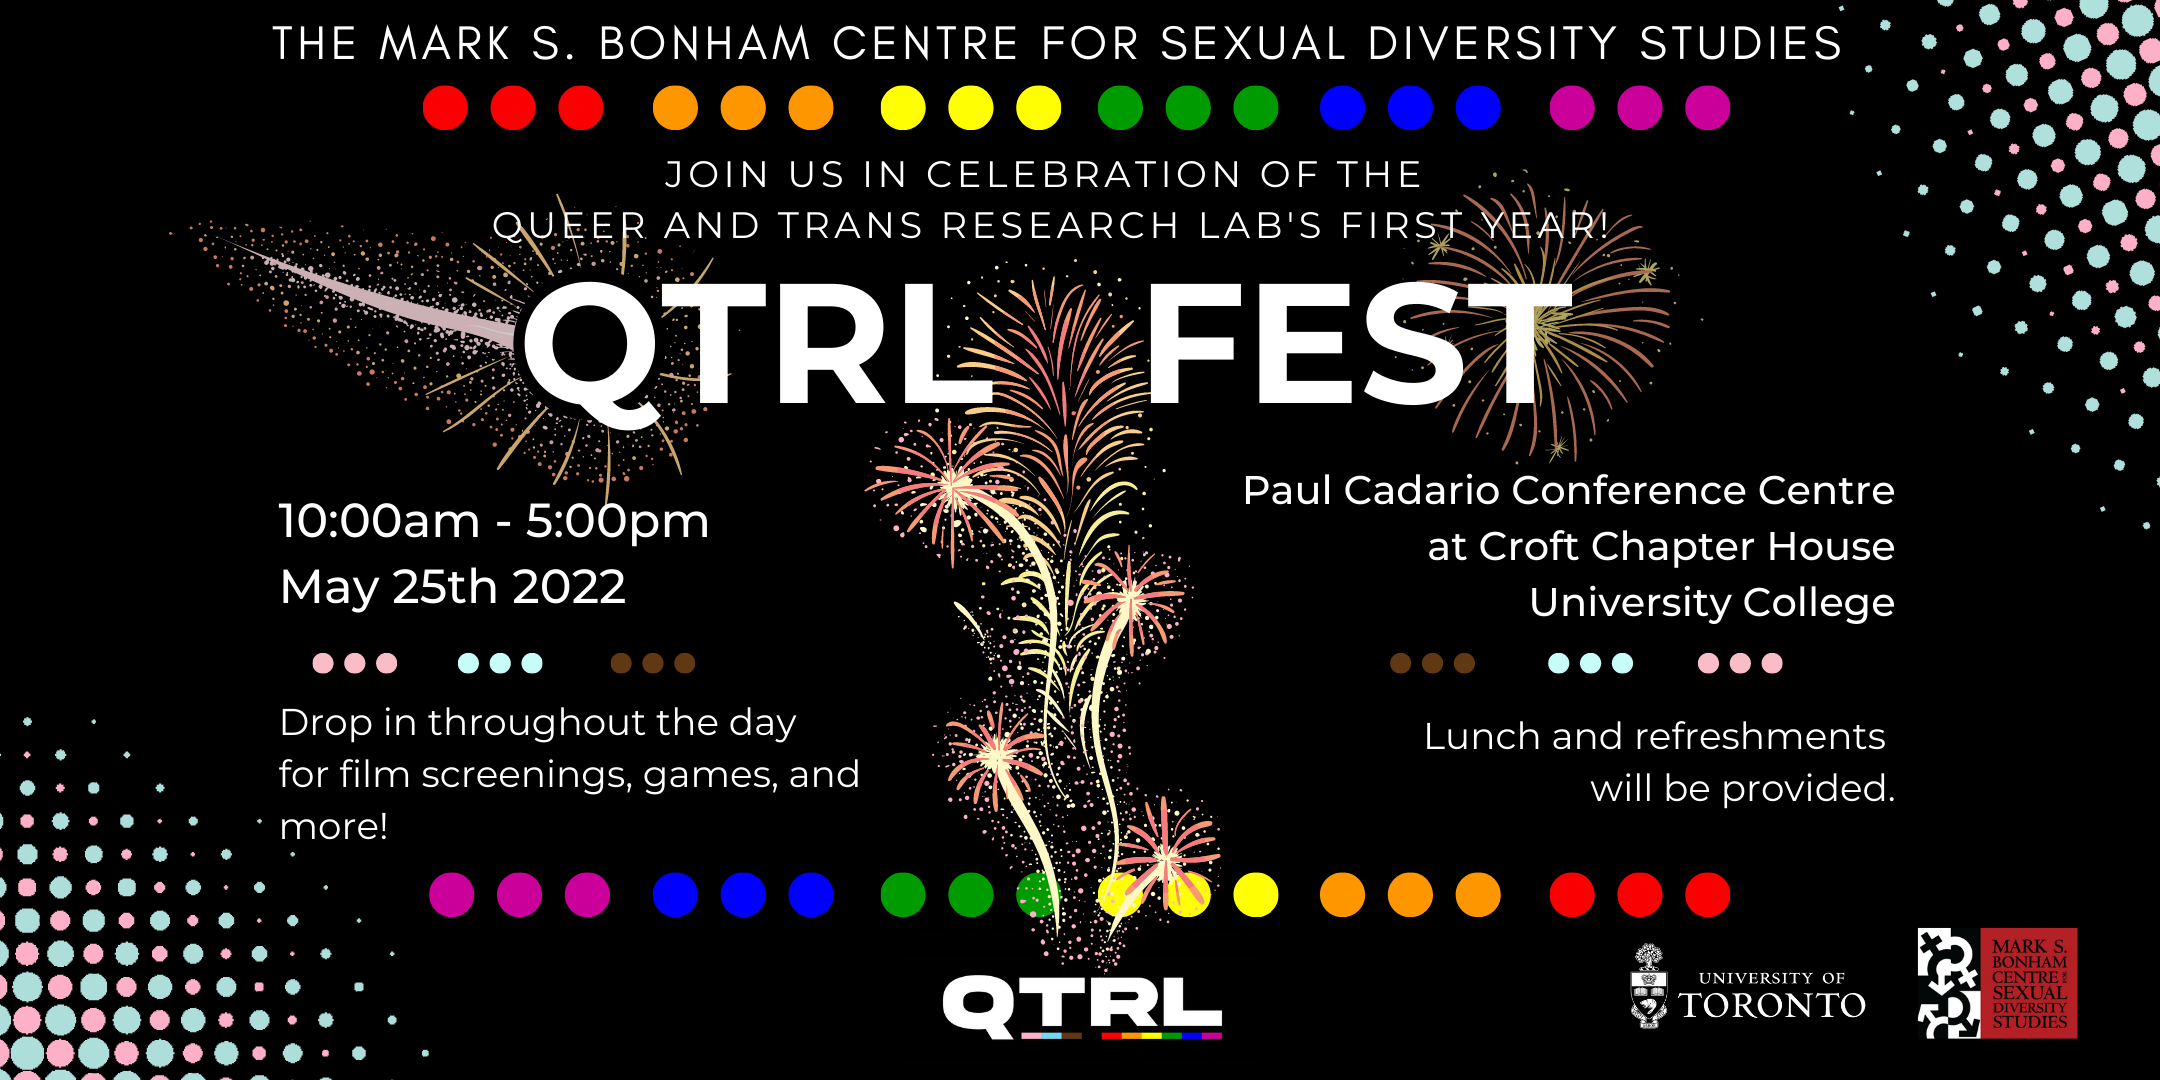 QTRL Fest - Celebrating the Queer and Trans Research Lab's First Year!